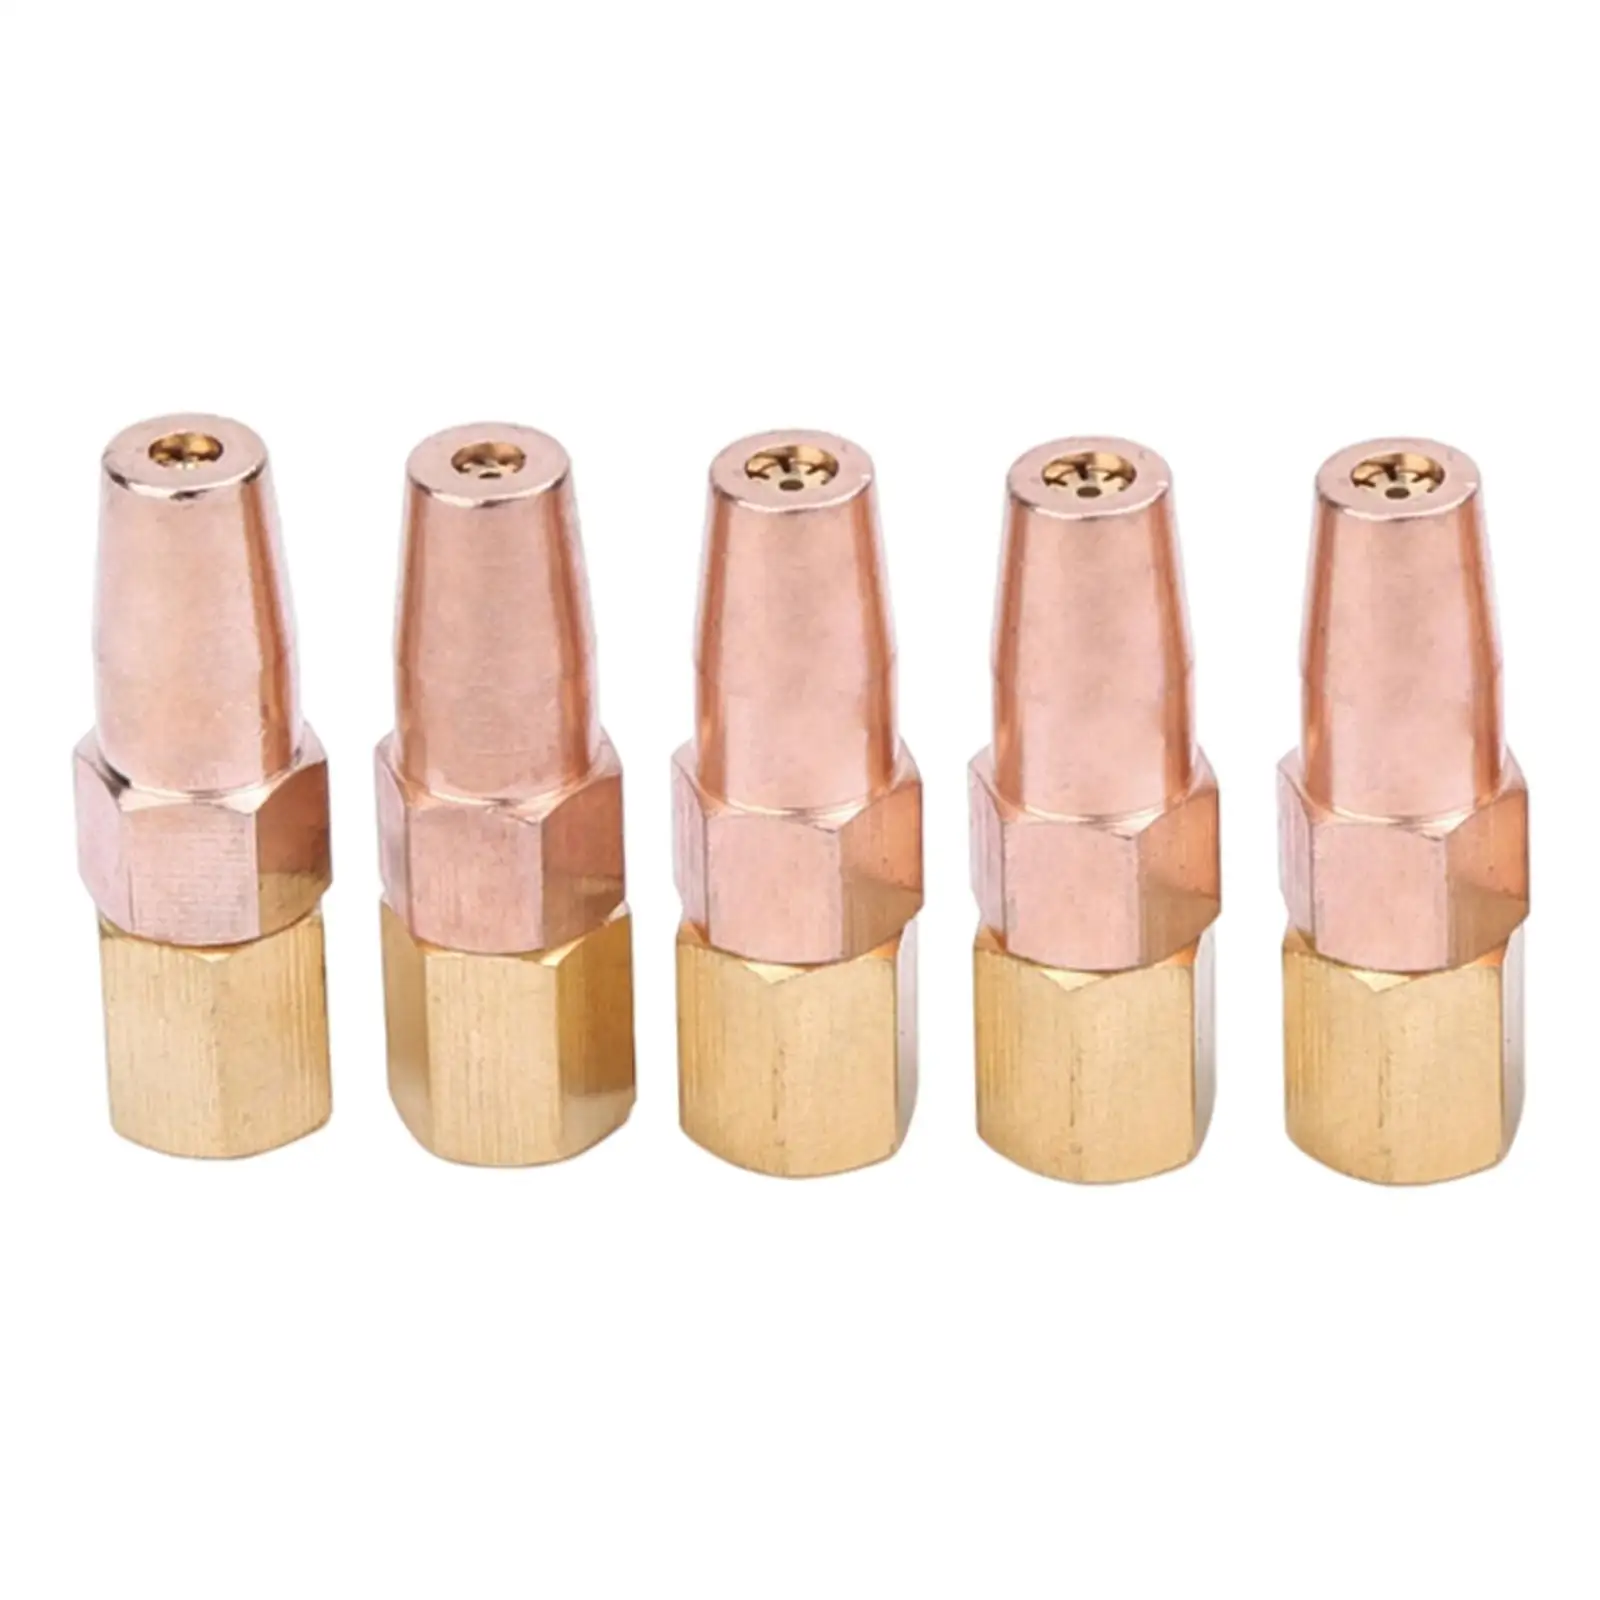 5Pieces Propane Gas Welding Nozzle H01-6 Oxygen Gas Contact Tips Holder Gas Nozzle for Heat Treating Straightening Metal Bending